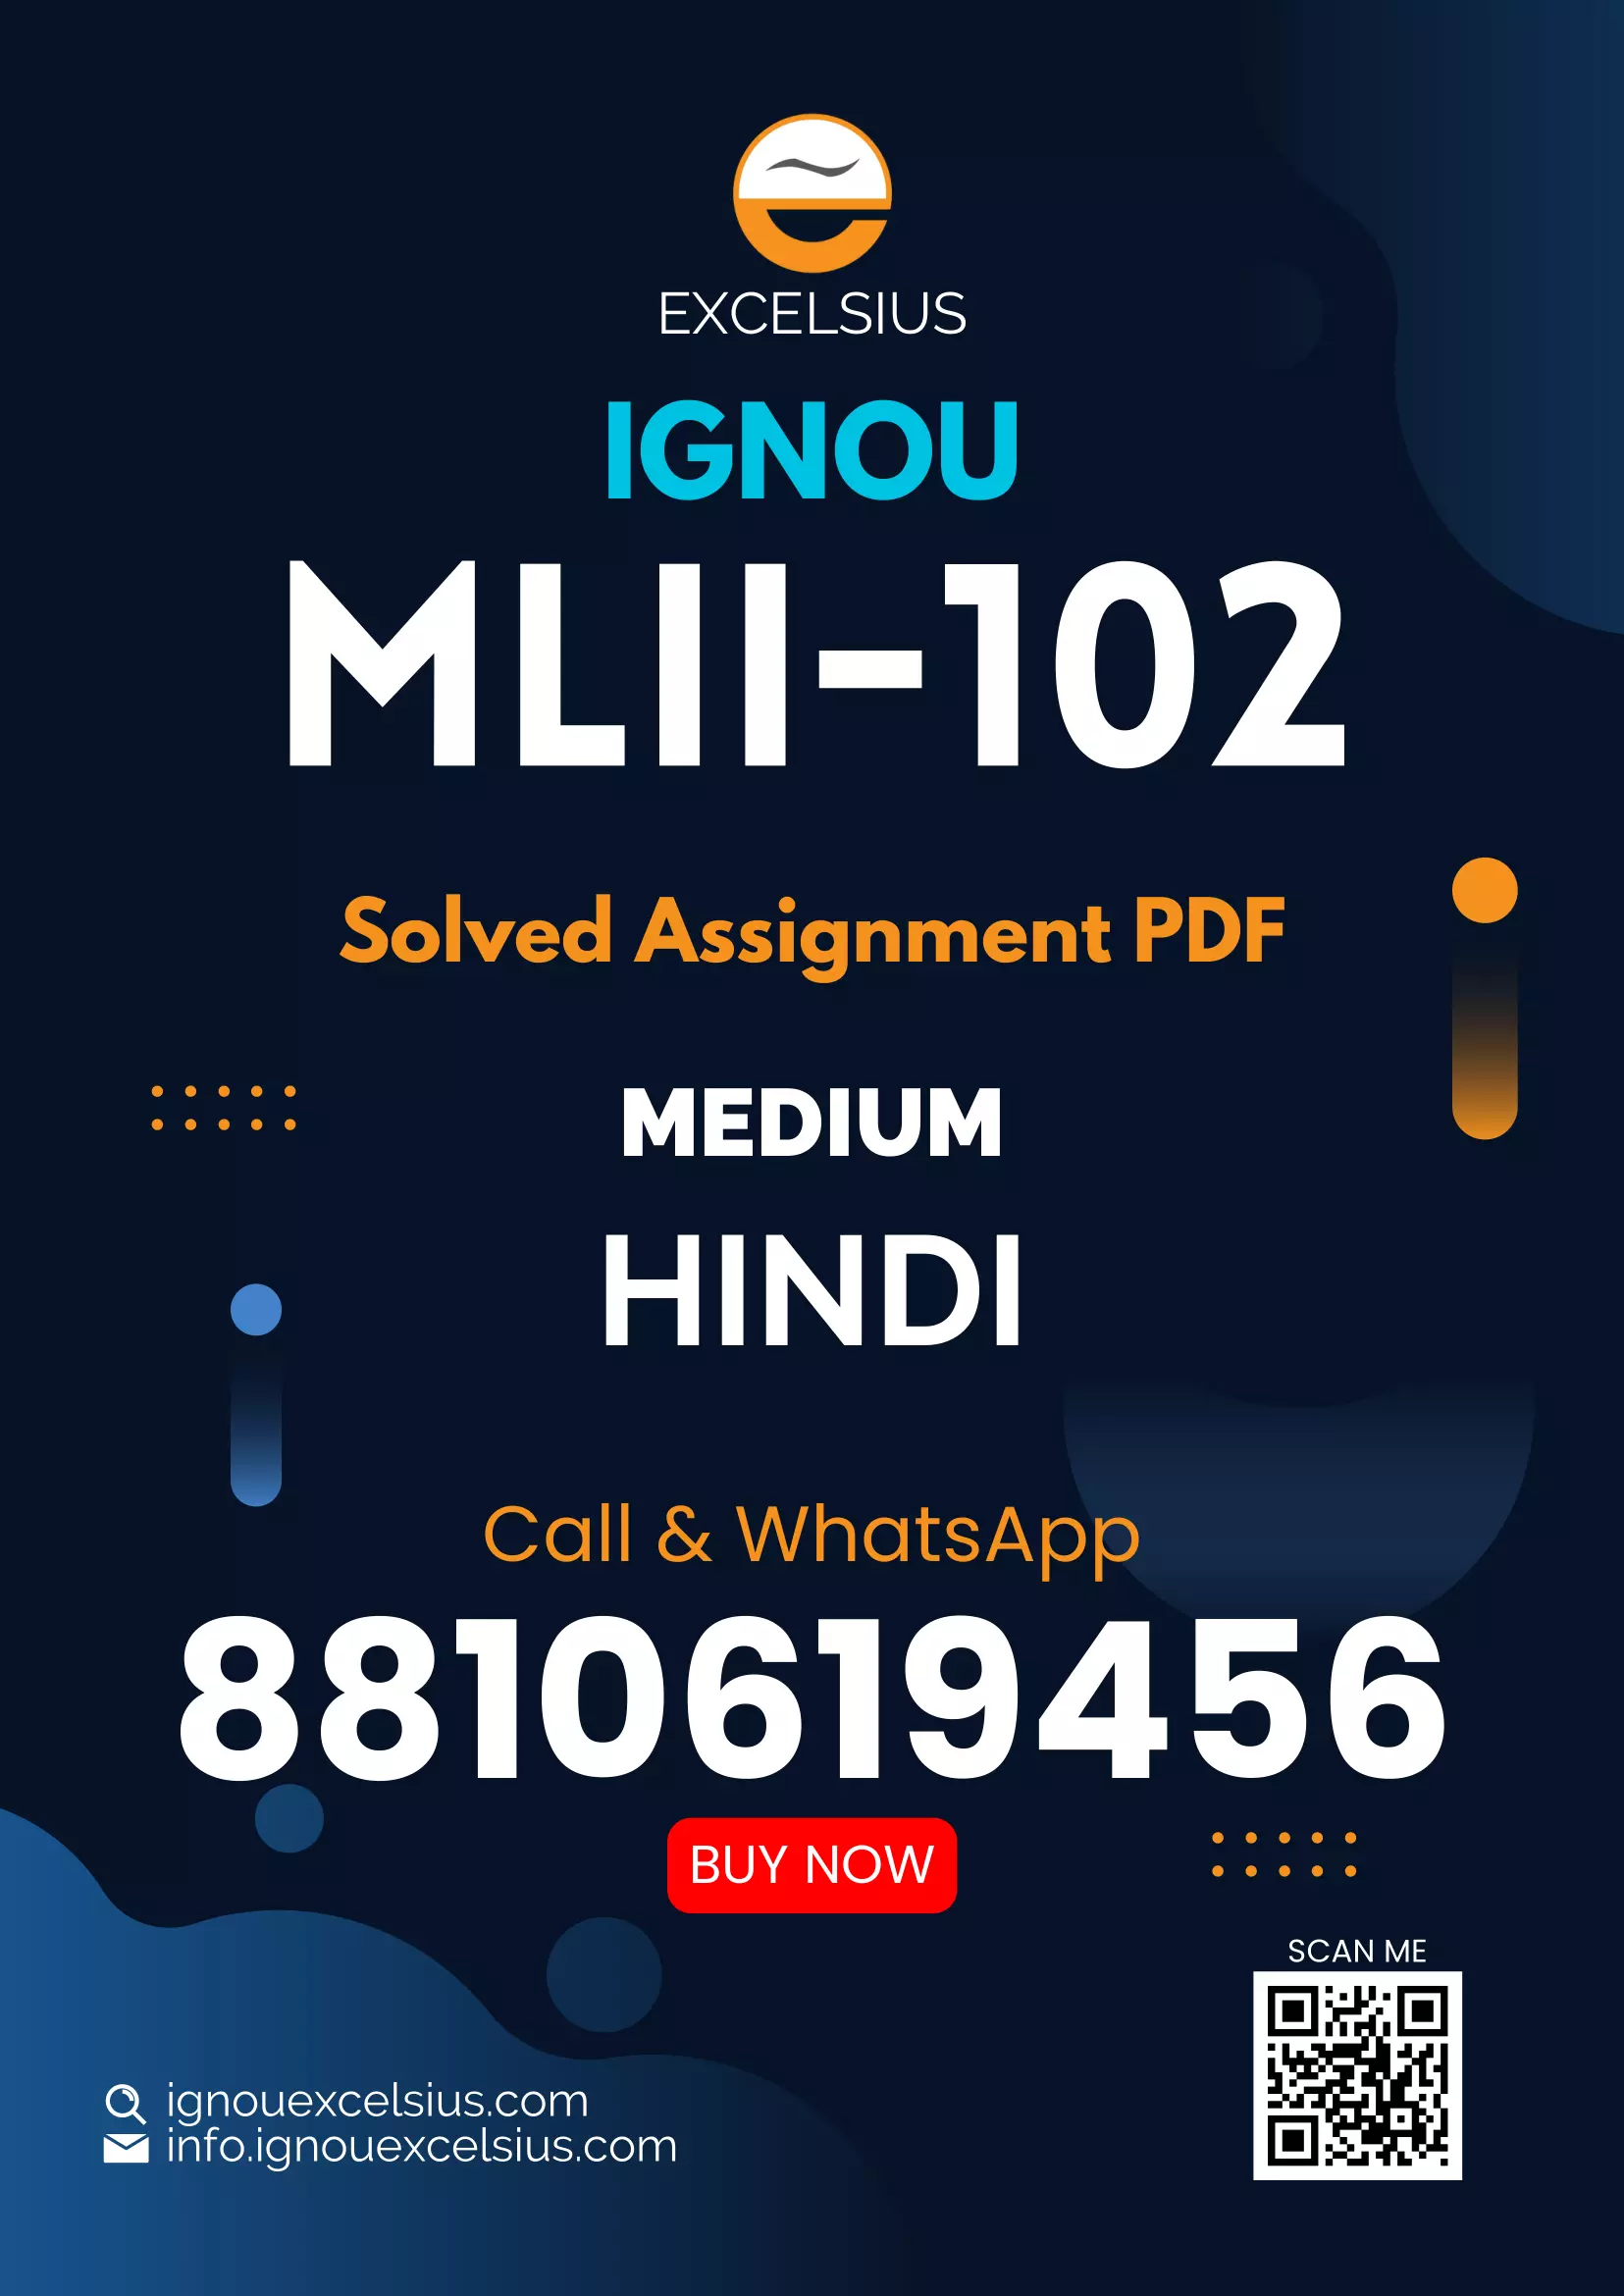 IGNOU MLII-102 - Information Processing and Retrieval, Latest Solved Assignment-July 2022 – January 2023